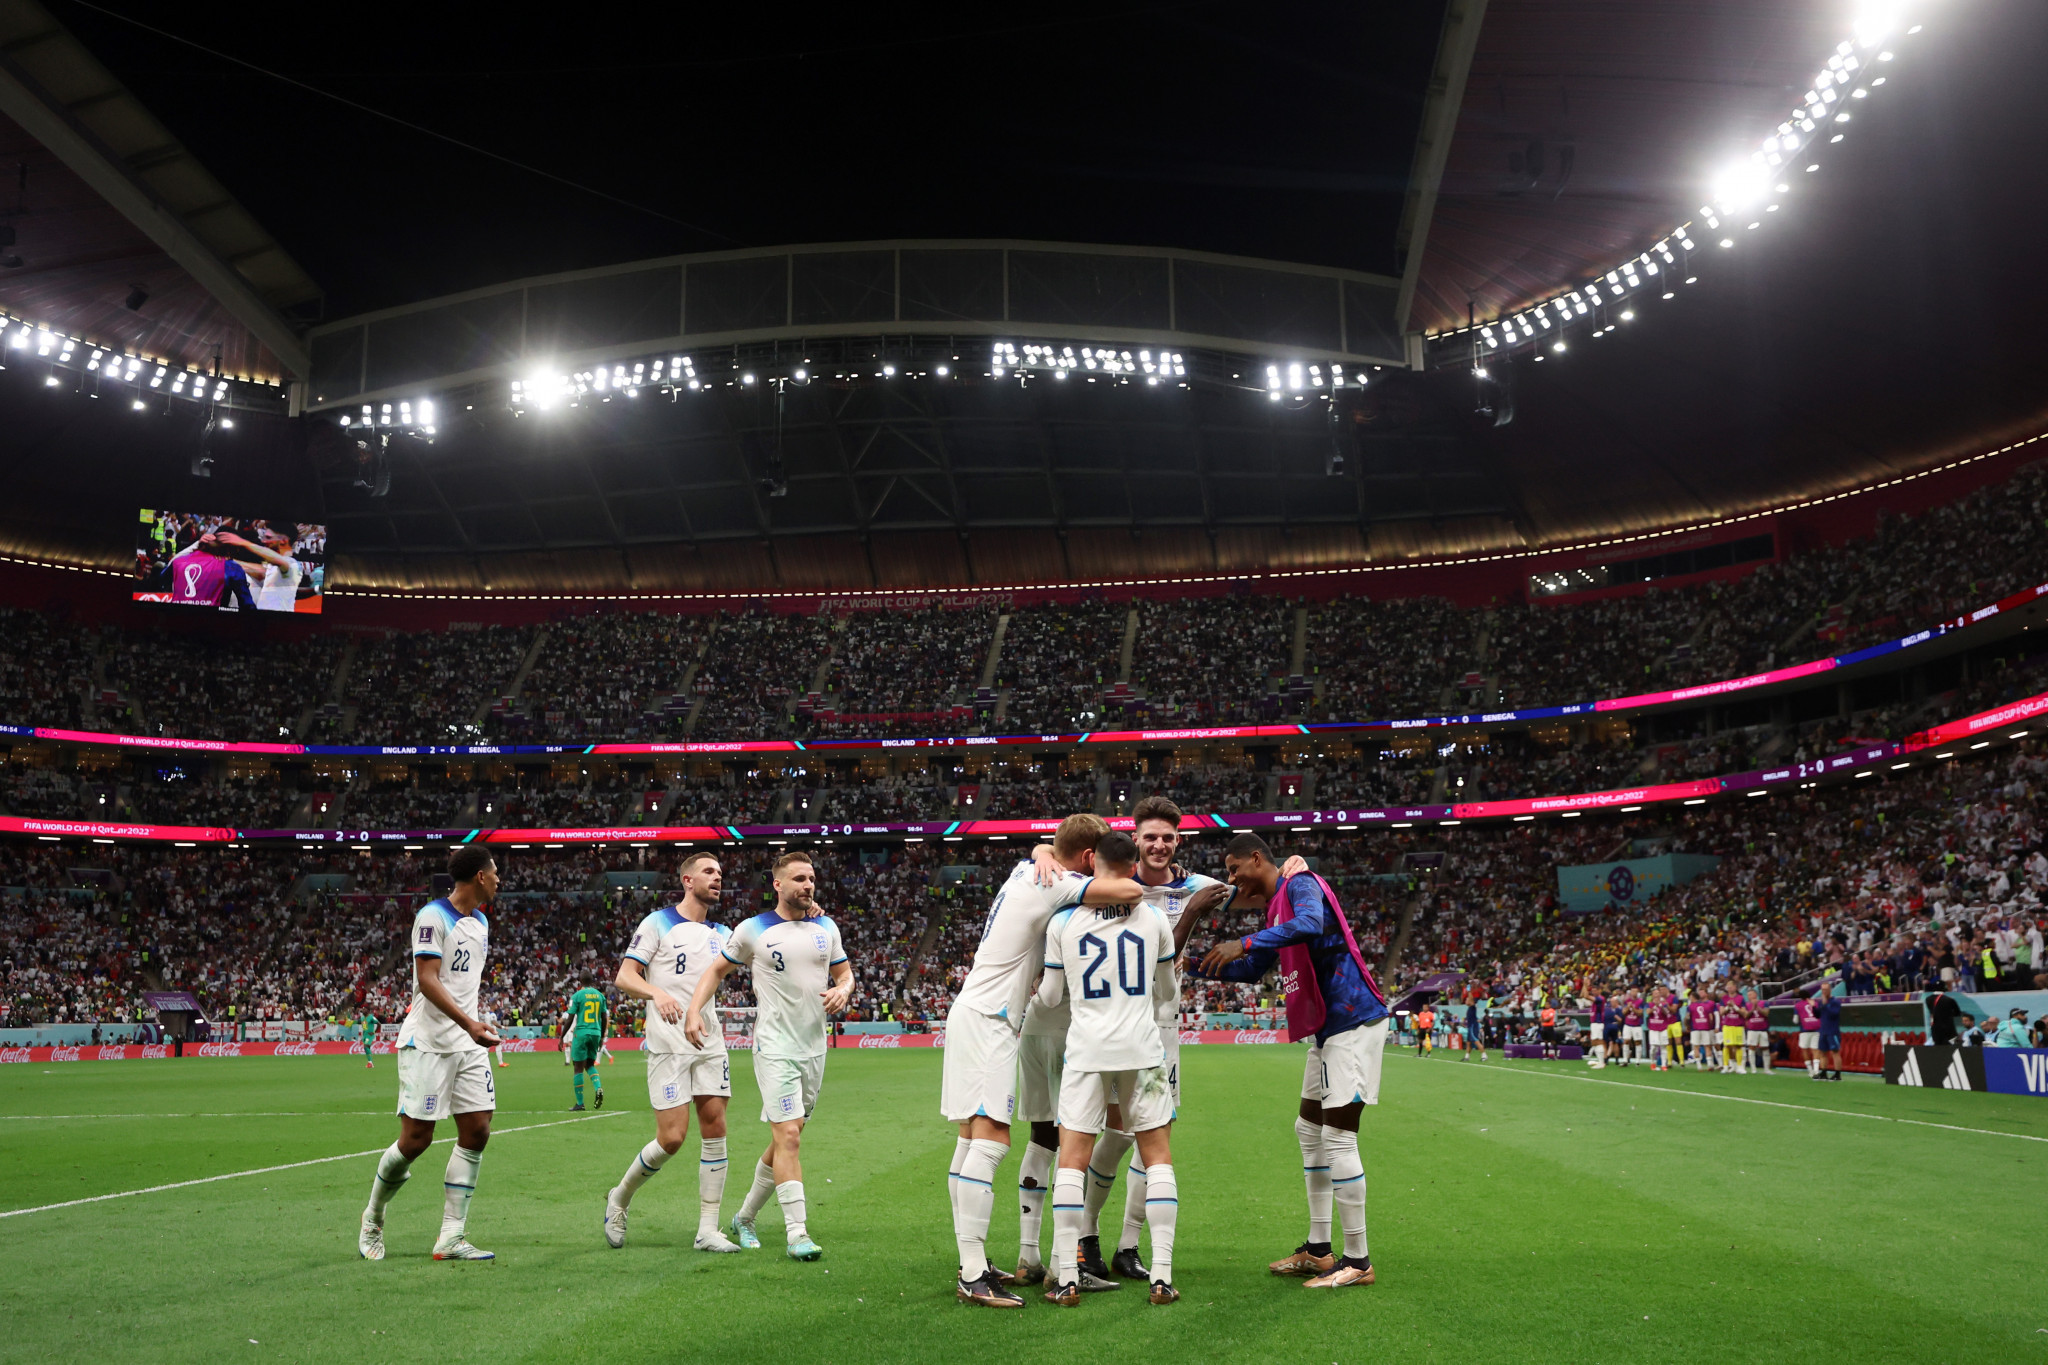 England cruised to a dominating 3-0 win over Senegal in their round of 16 game at the Qatar 2022 FIFA World Cup ©Getty Images